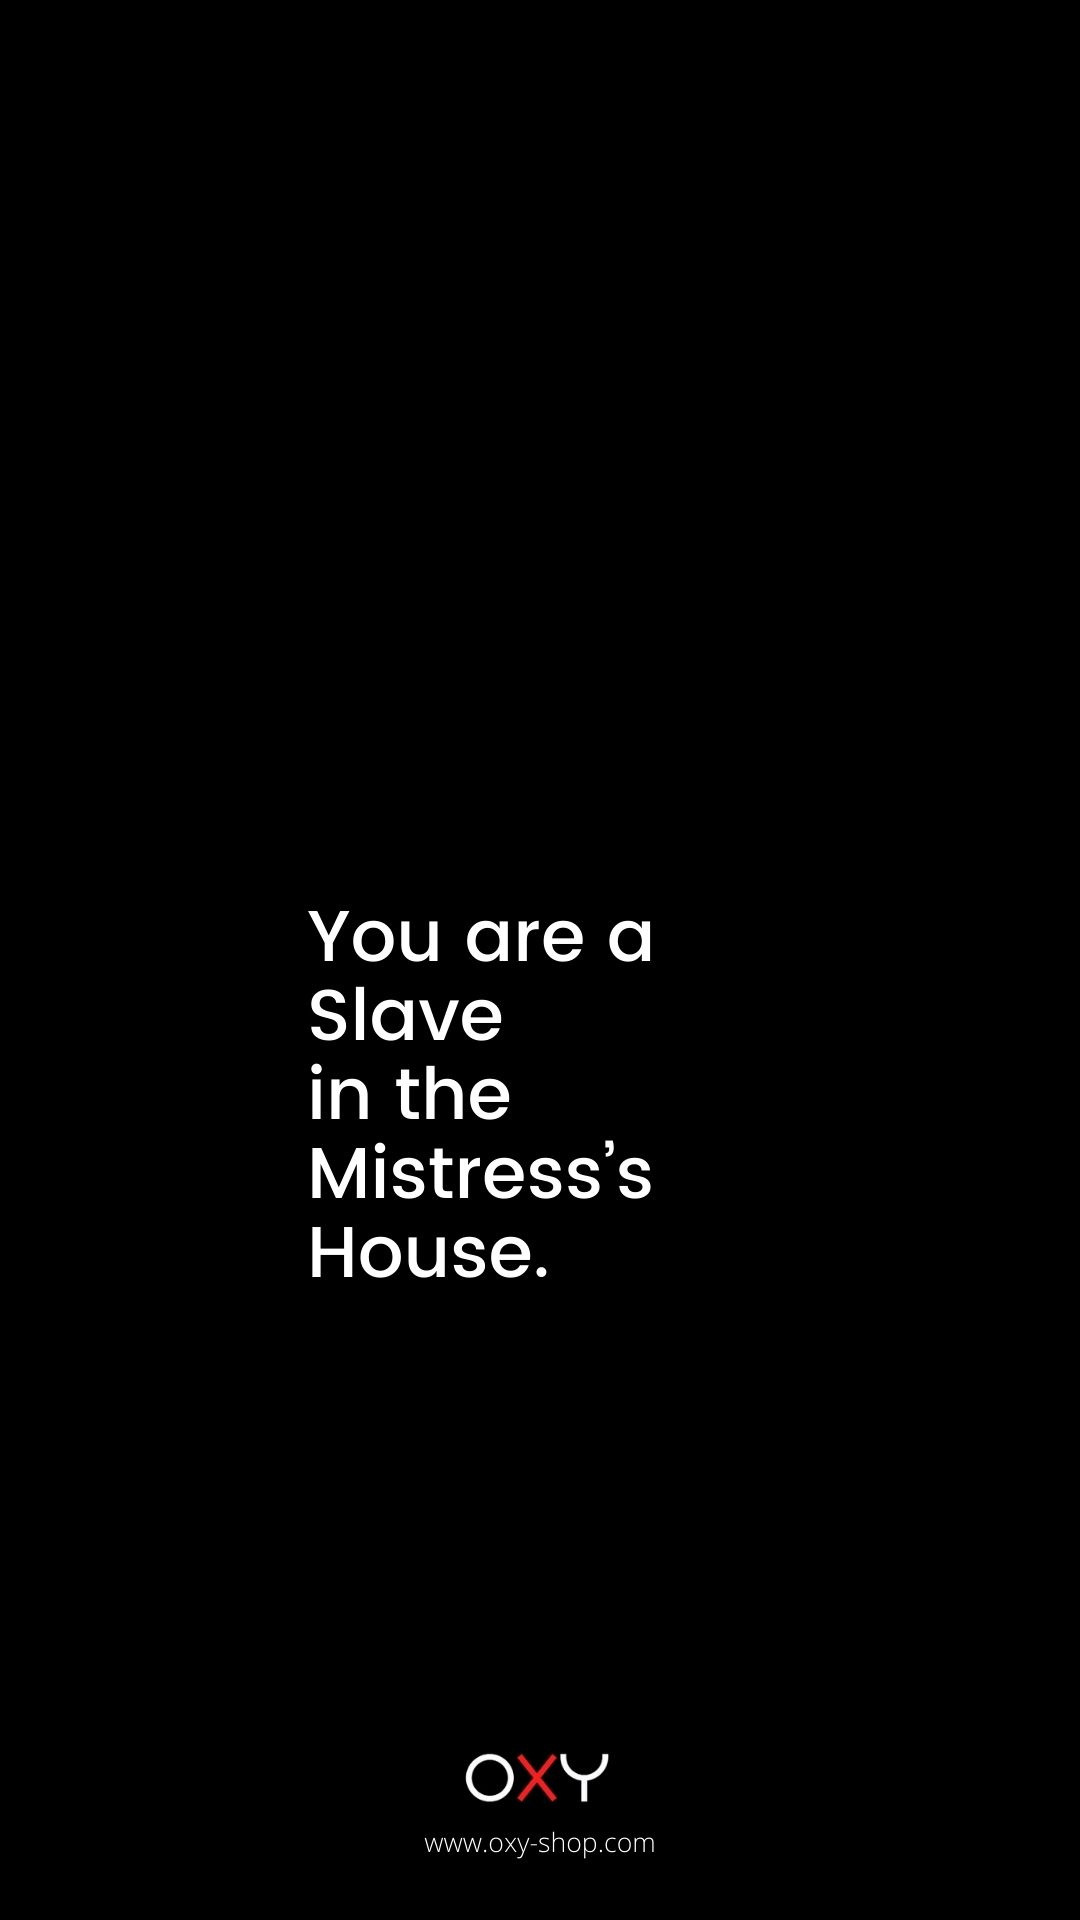 You are a Slave in the Mistres's house. - BDSM wallpaper